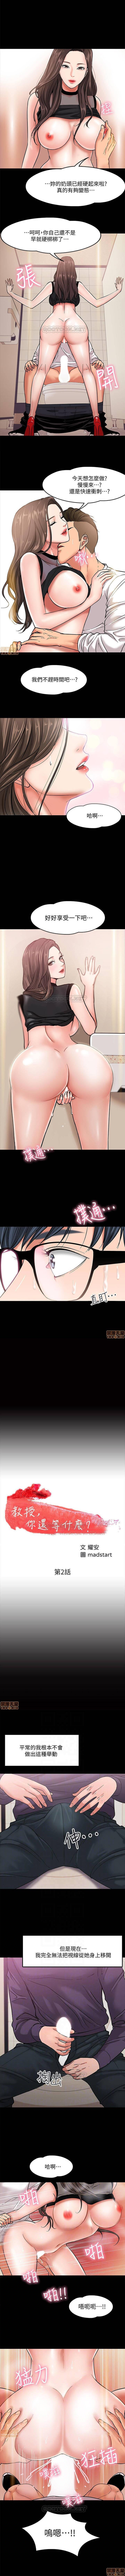 PROFESSOR, ARE YOU JUST GOING TO LOOK AT ME? | DESIRE SWAMP | 教授，你還等什麼? Ch. 2 [Chinese] Manhwa 1